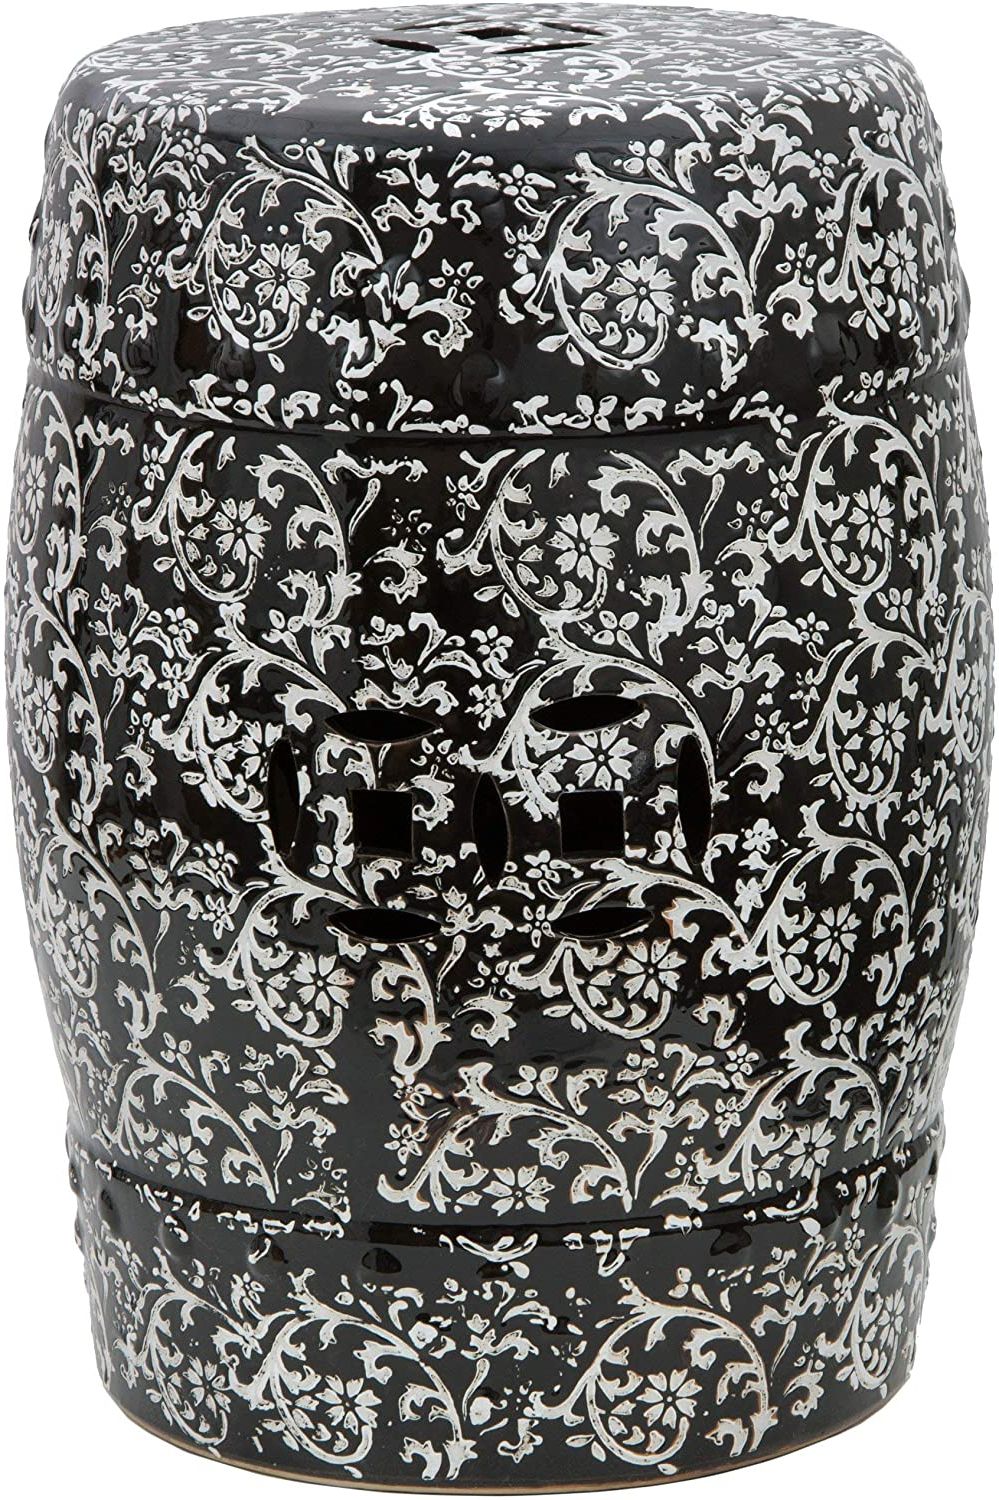 Well Liked Swanson Ceramic Garden Stools Throughout Oriental Furniture Porcelain Garden Stool, 18 Inch, Black/white Floral (View 16 of 30)